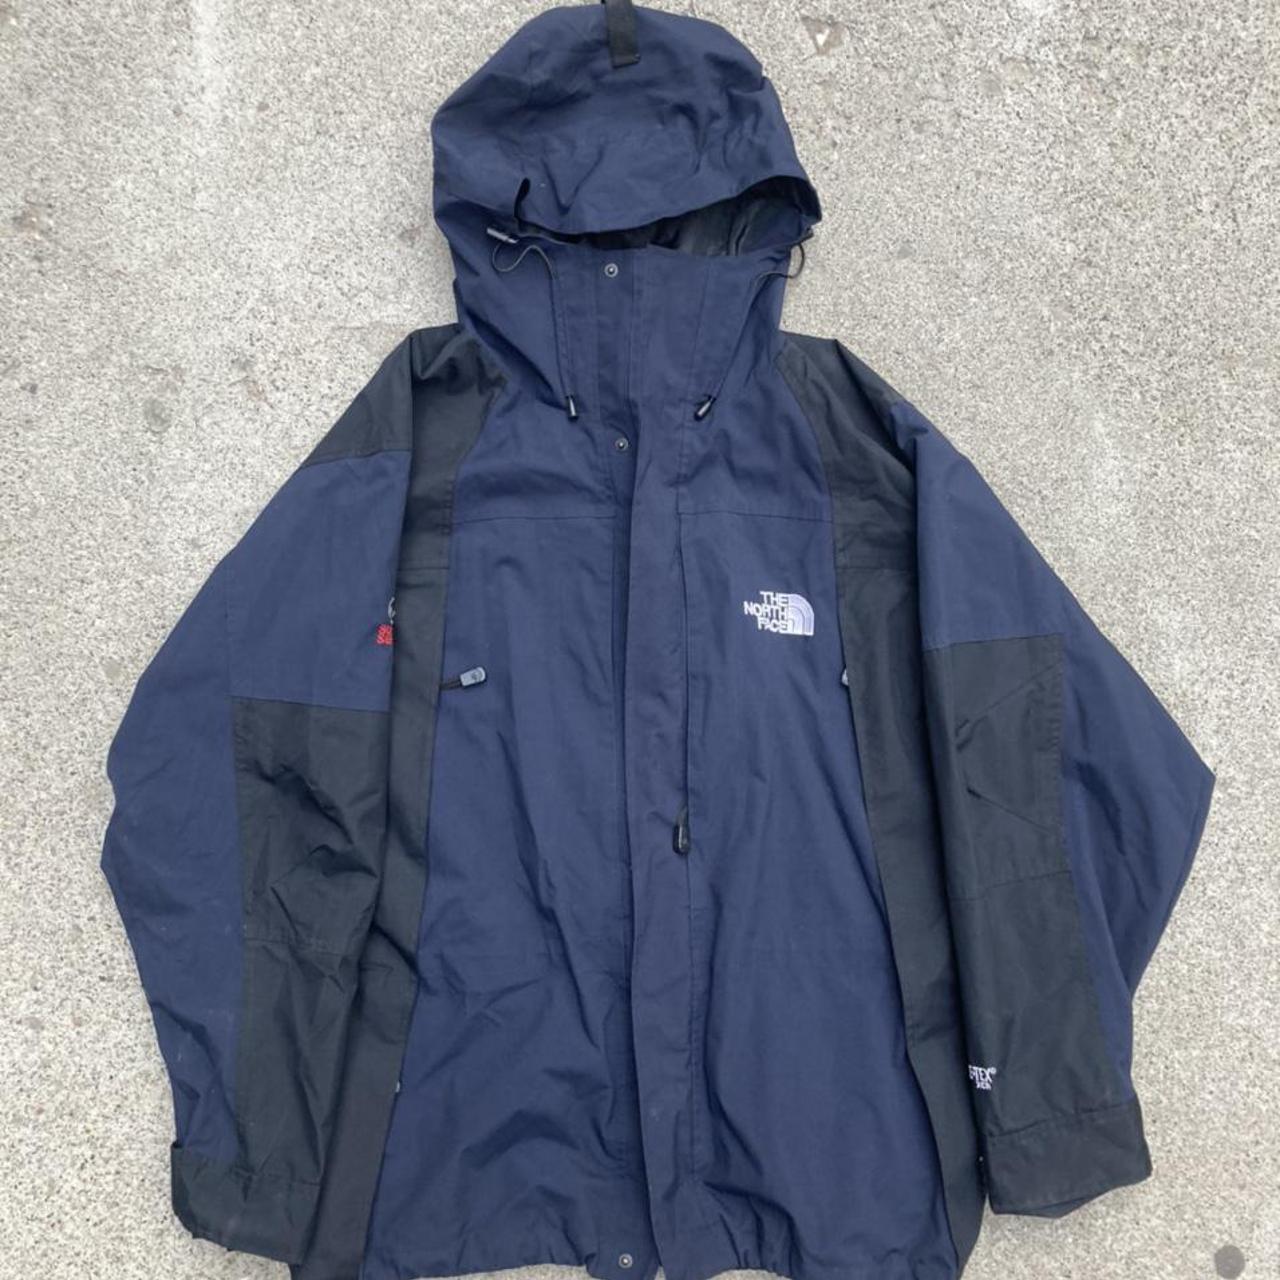 Product Image 1 - Gore-Tex North Face Jacket 🌨☔️💙
Winter